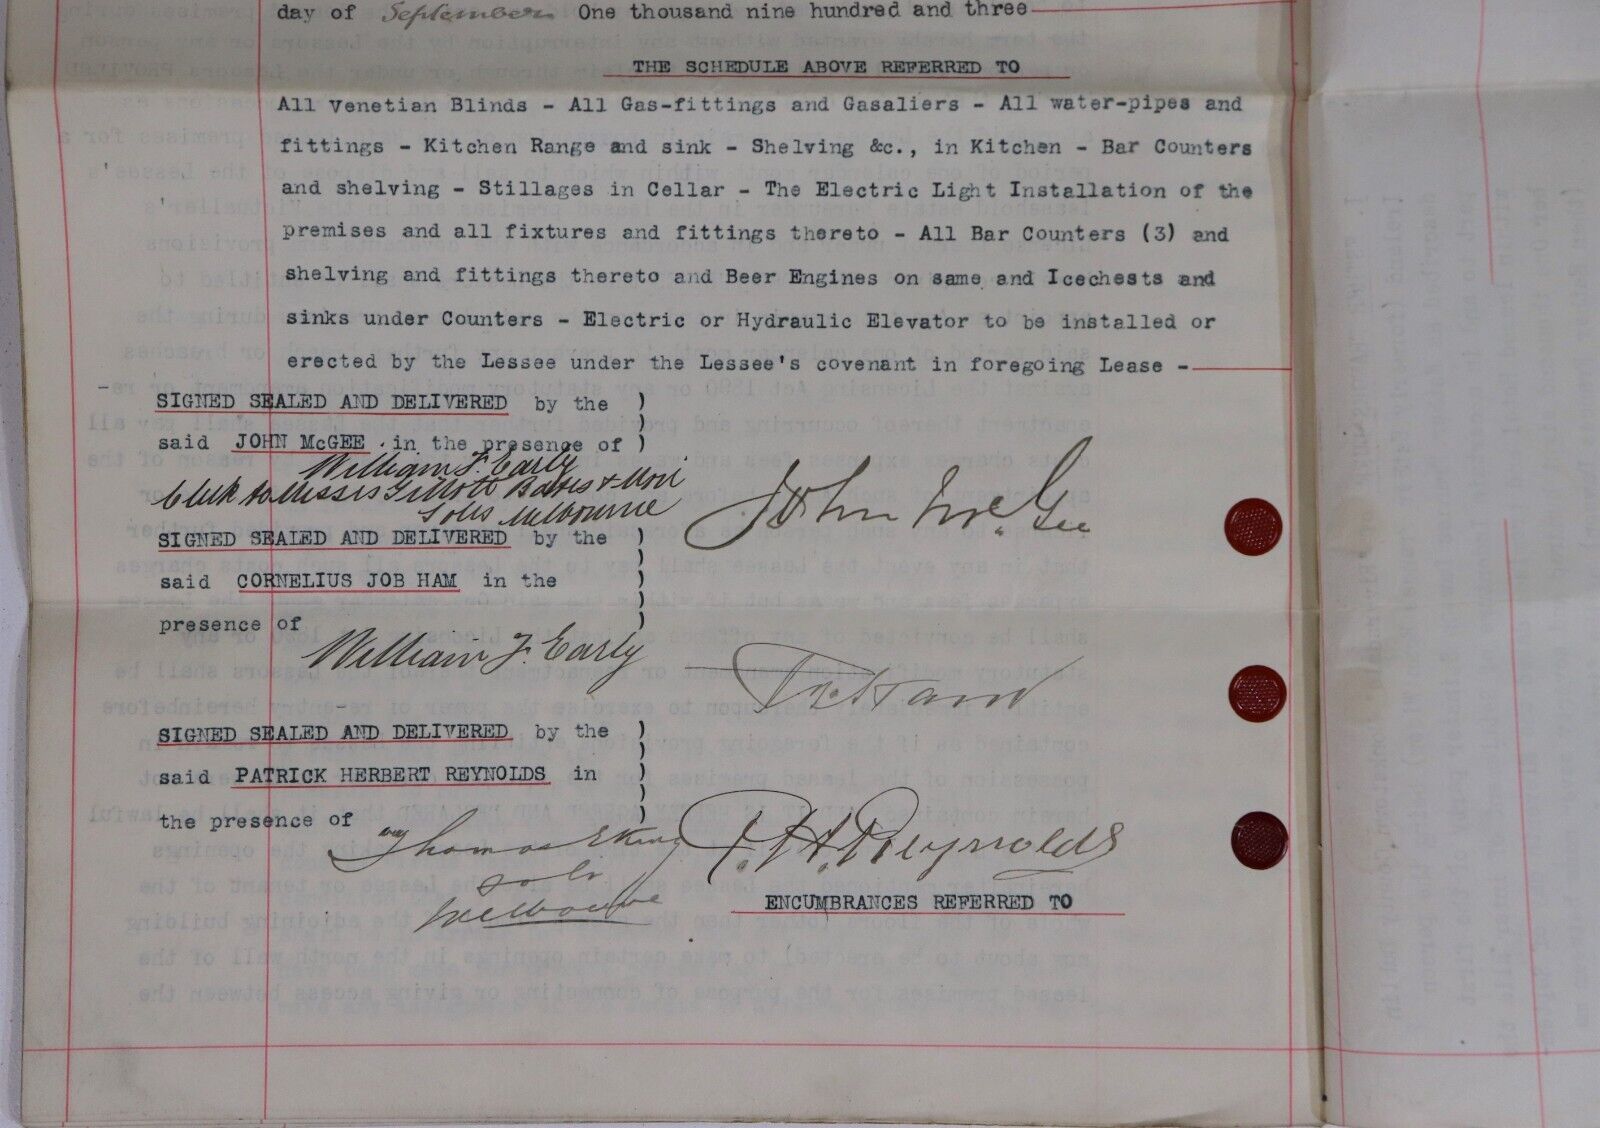 1903 Lease Agreement For Cathedral Hotel - Melbourne CBD - Manuscript History